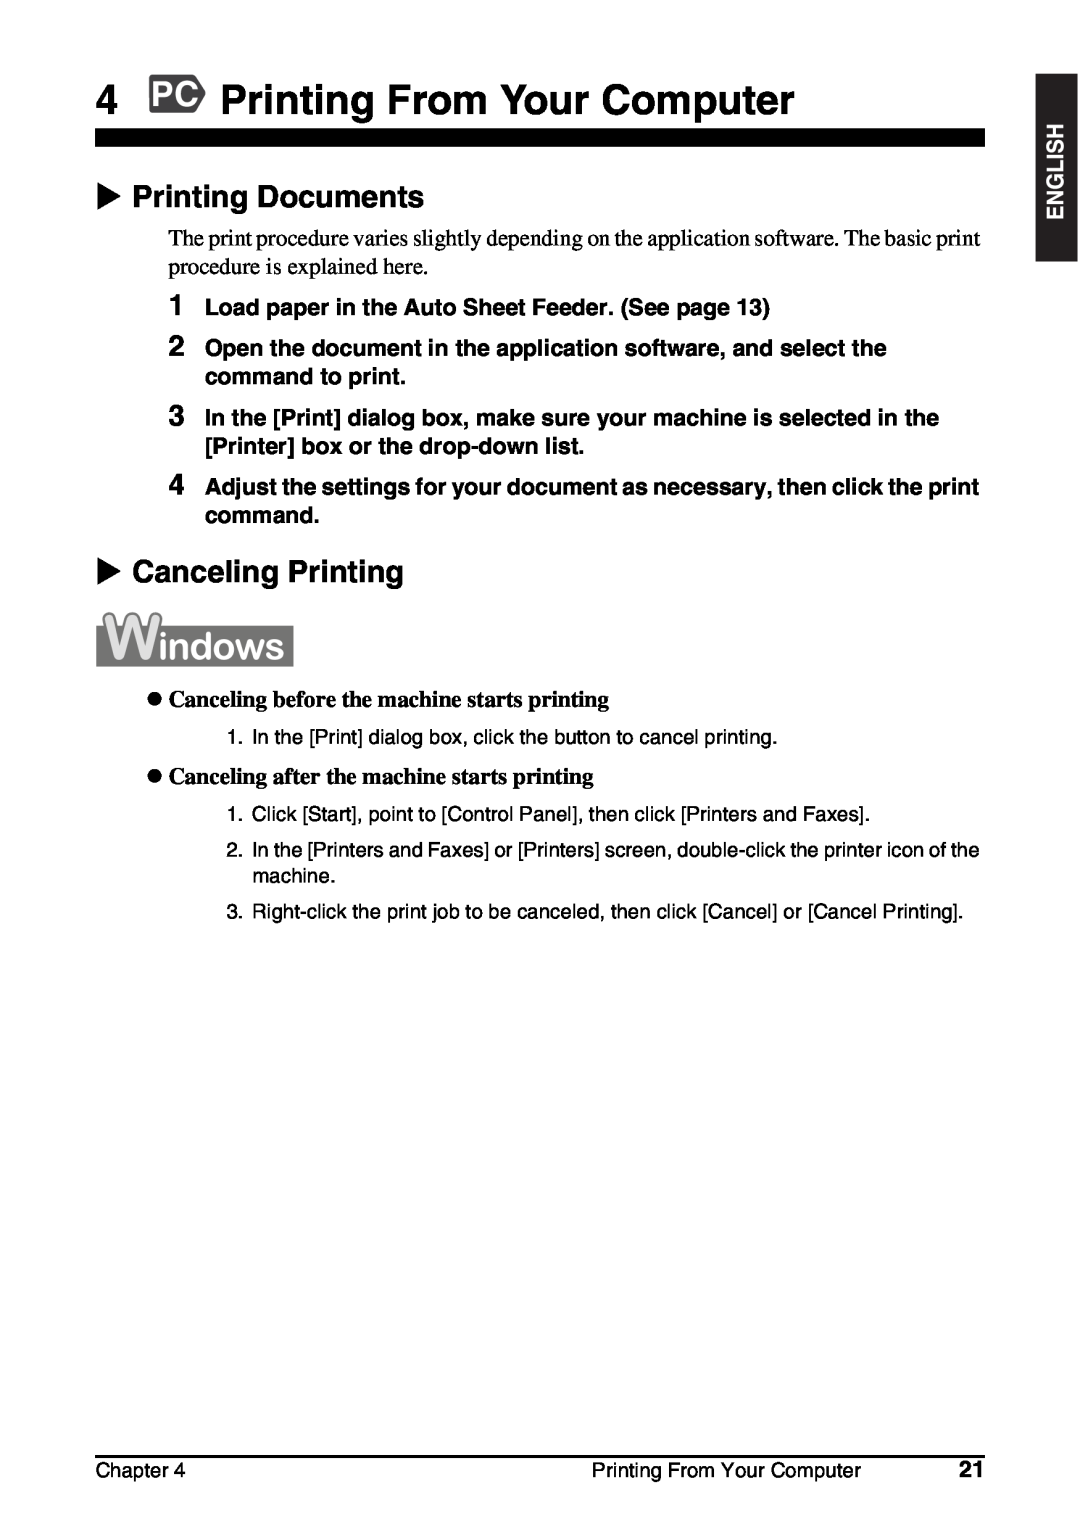 Canon MP130 manual PC Printing From Your Computer, X Printing Documents, X Canceling Printing 